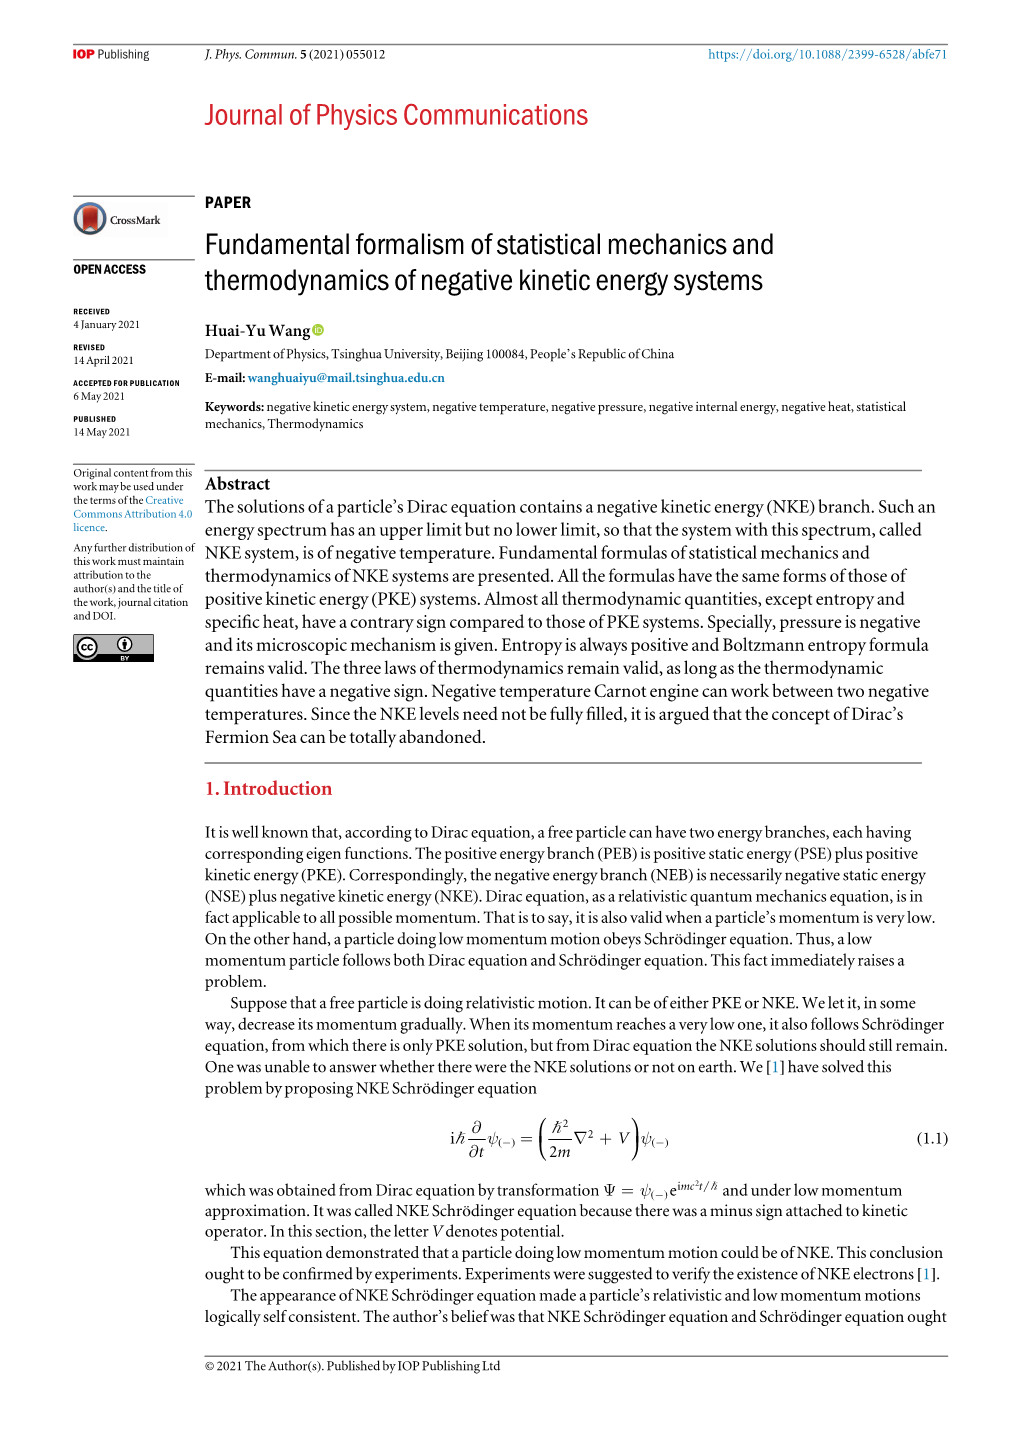 Fundamental Formalism of Statistical Mechanics and OPEN ACCESS Thermodynamics of Negative Kinetic Energy Systems